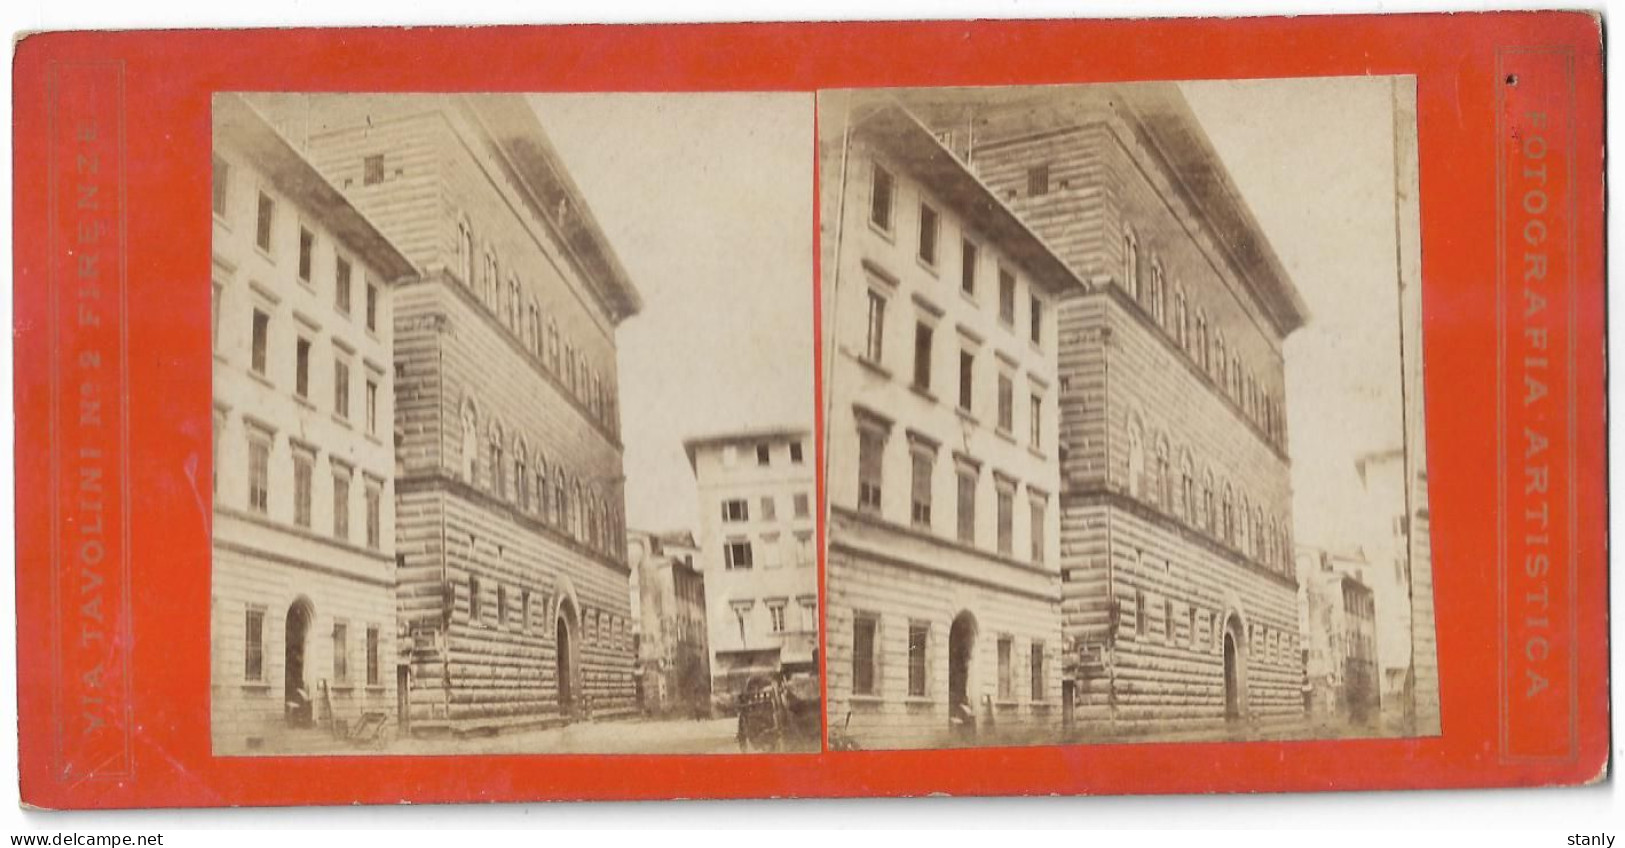 FIRENZE -  PALAZZO STROZZI - ITALIA - Stereoscopes - Side-by-side Viewers